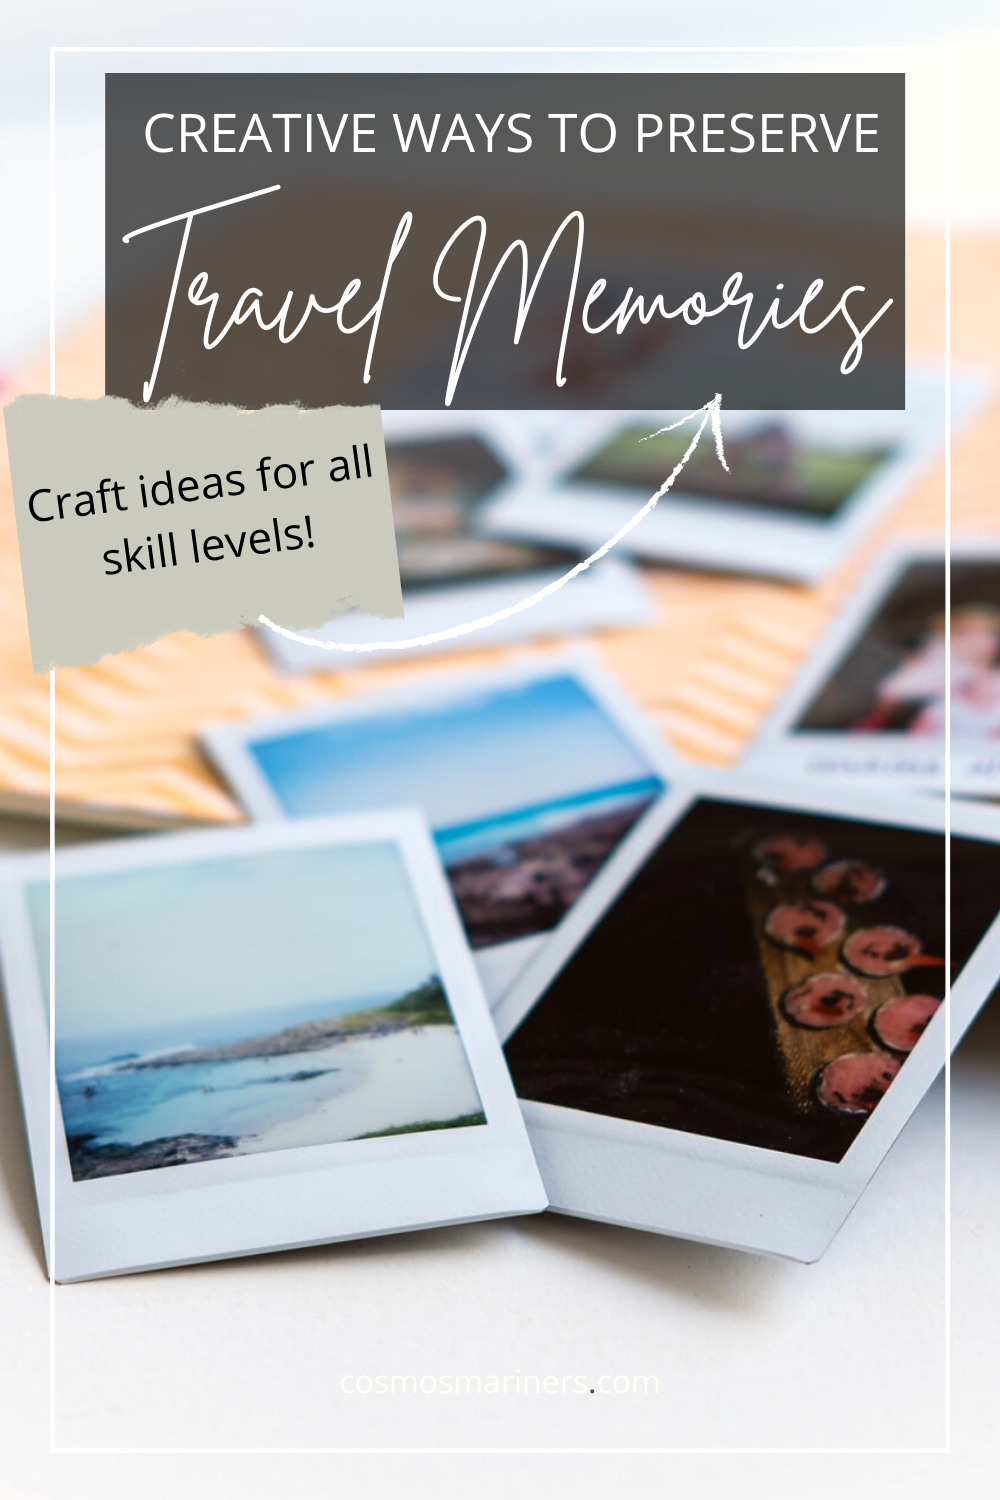 15 Creative Ways To Preserve Your Travel Memories In Style - Ideas